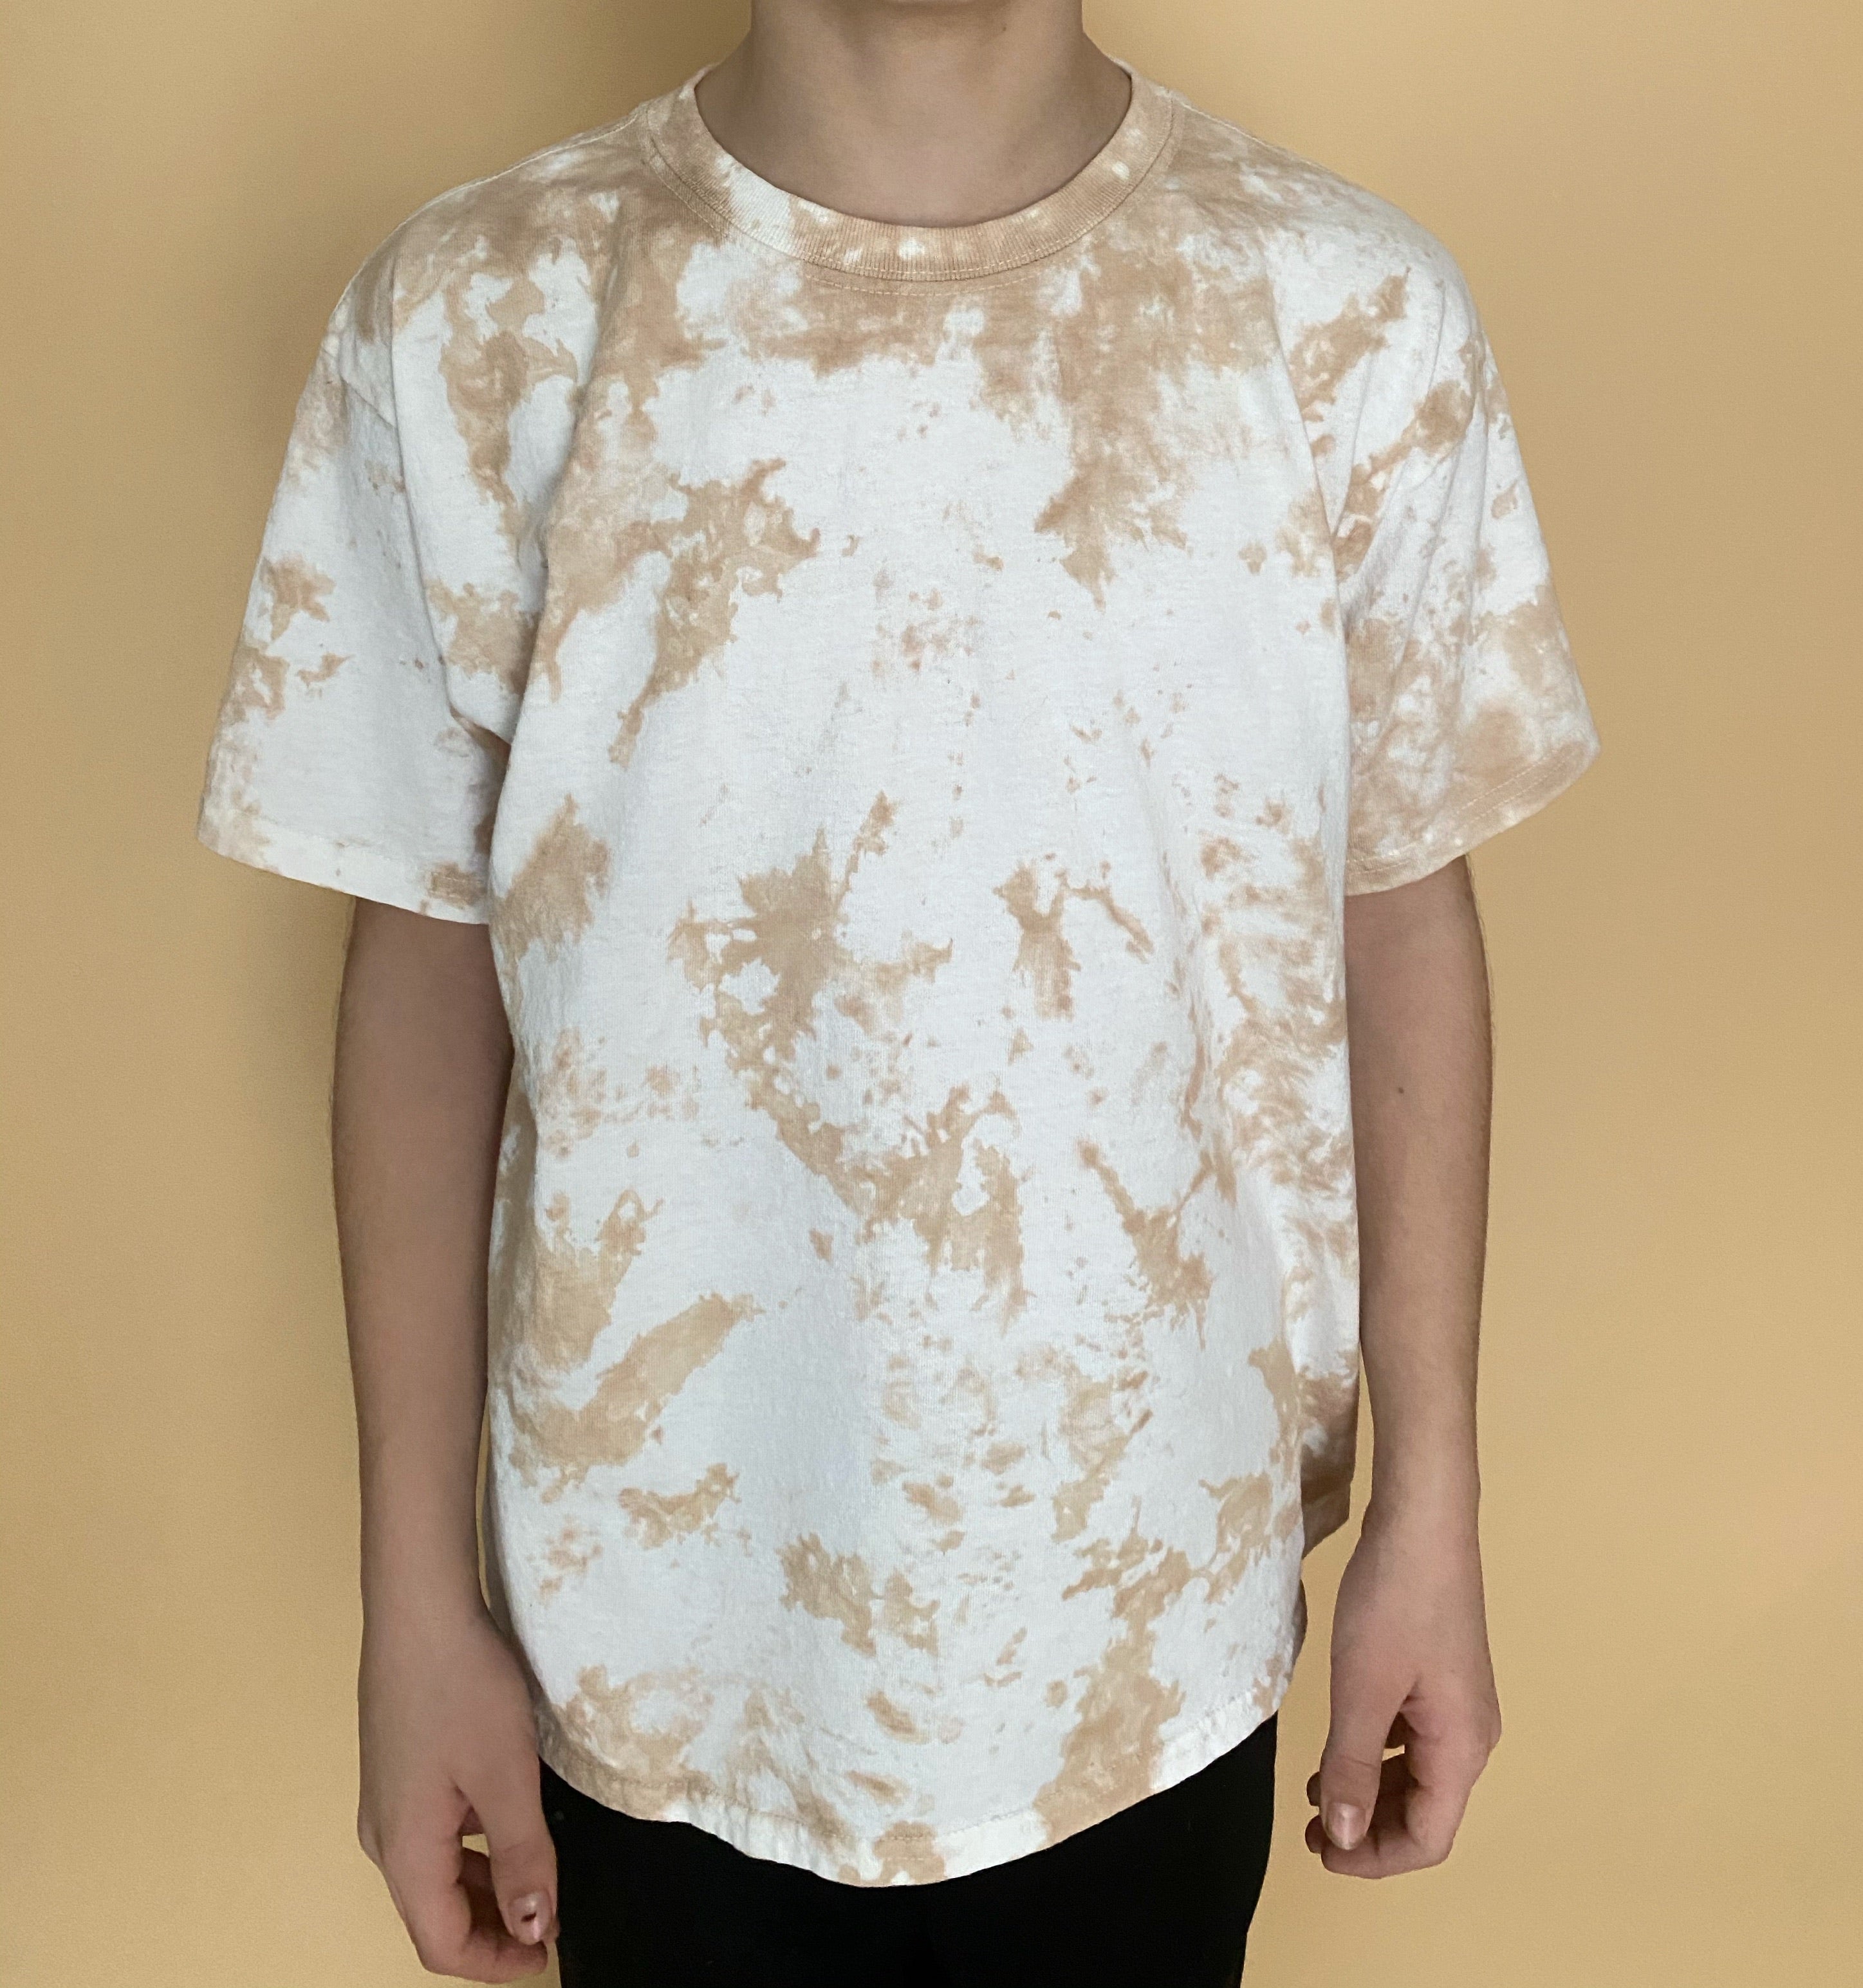 Toddler and Youth T-Shirt